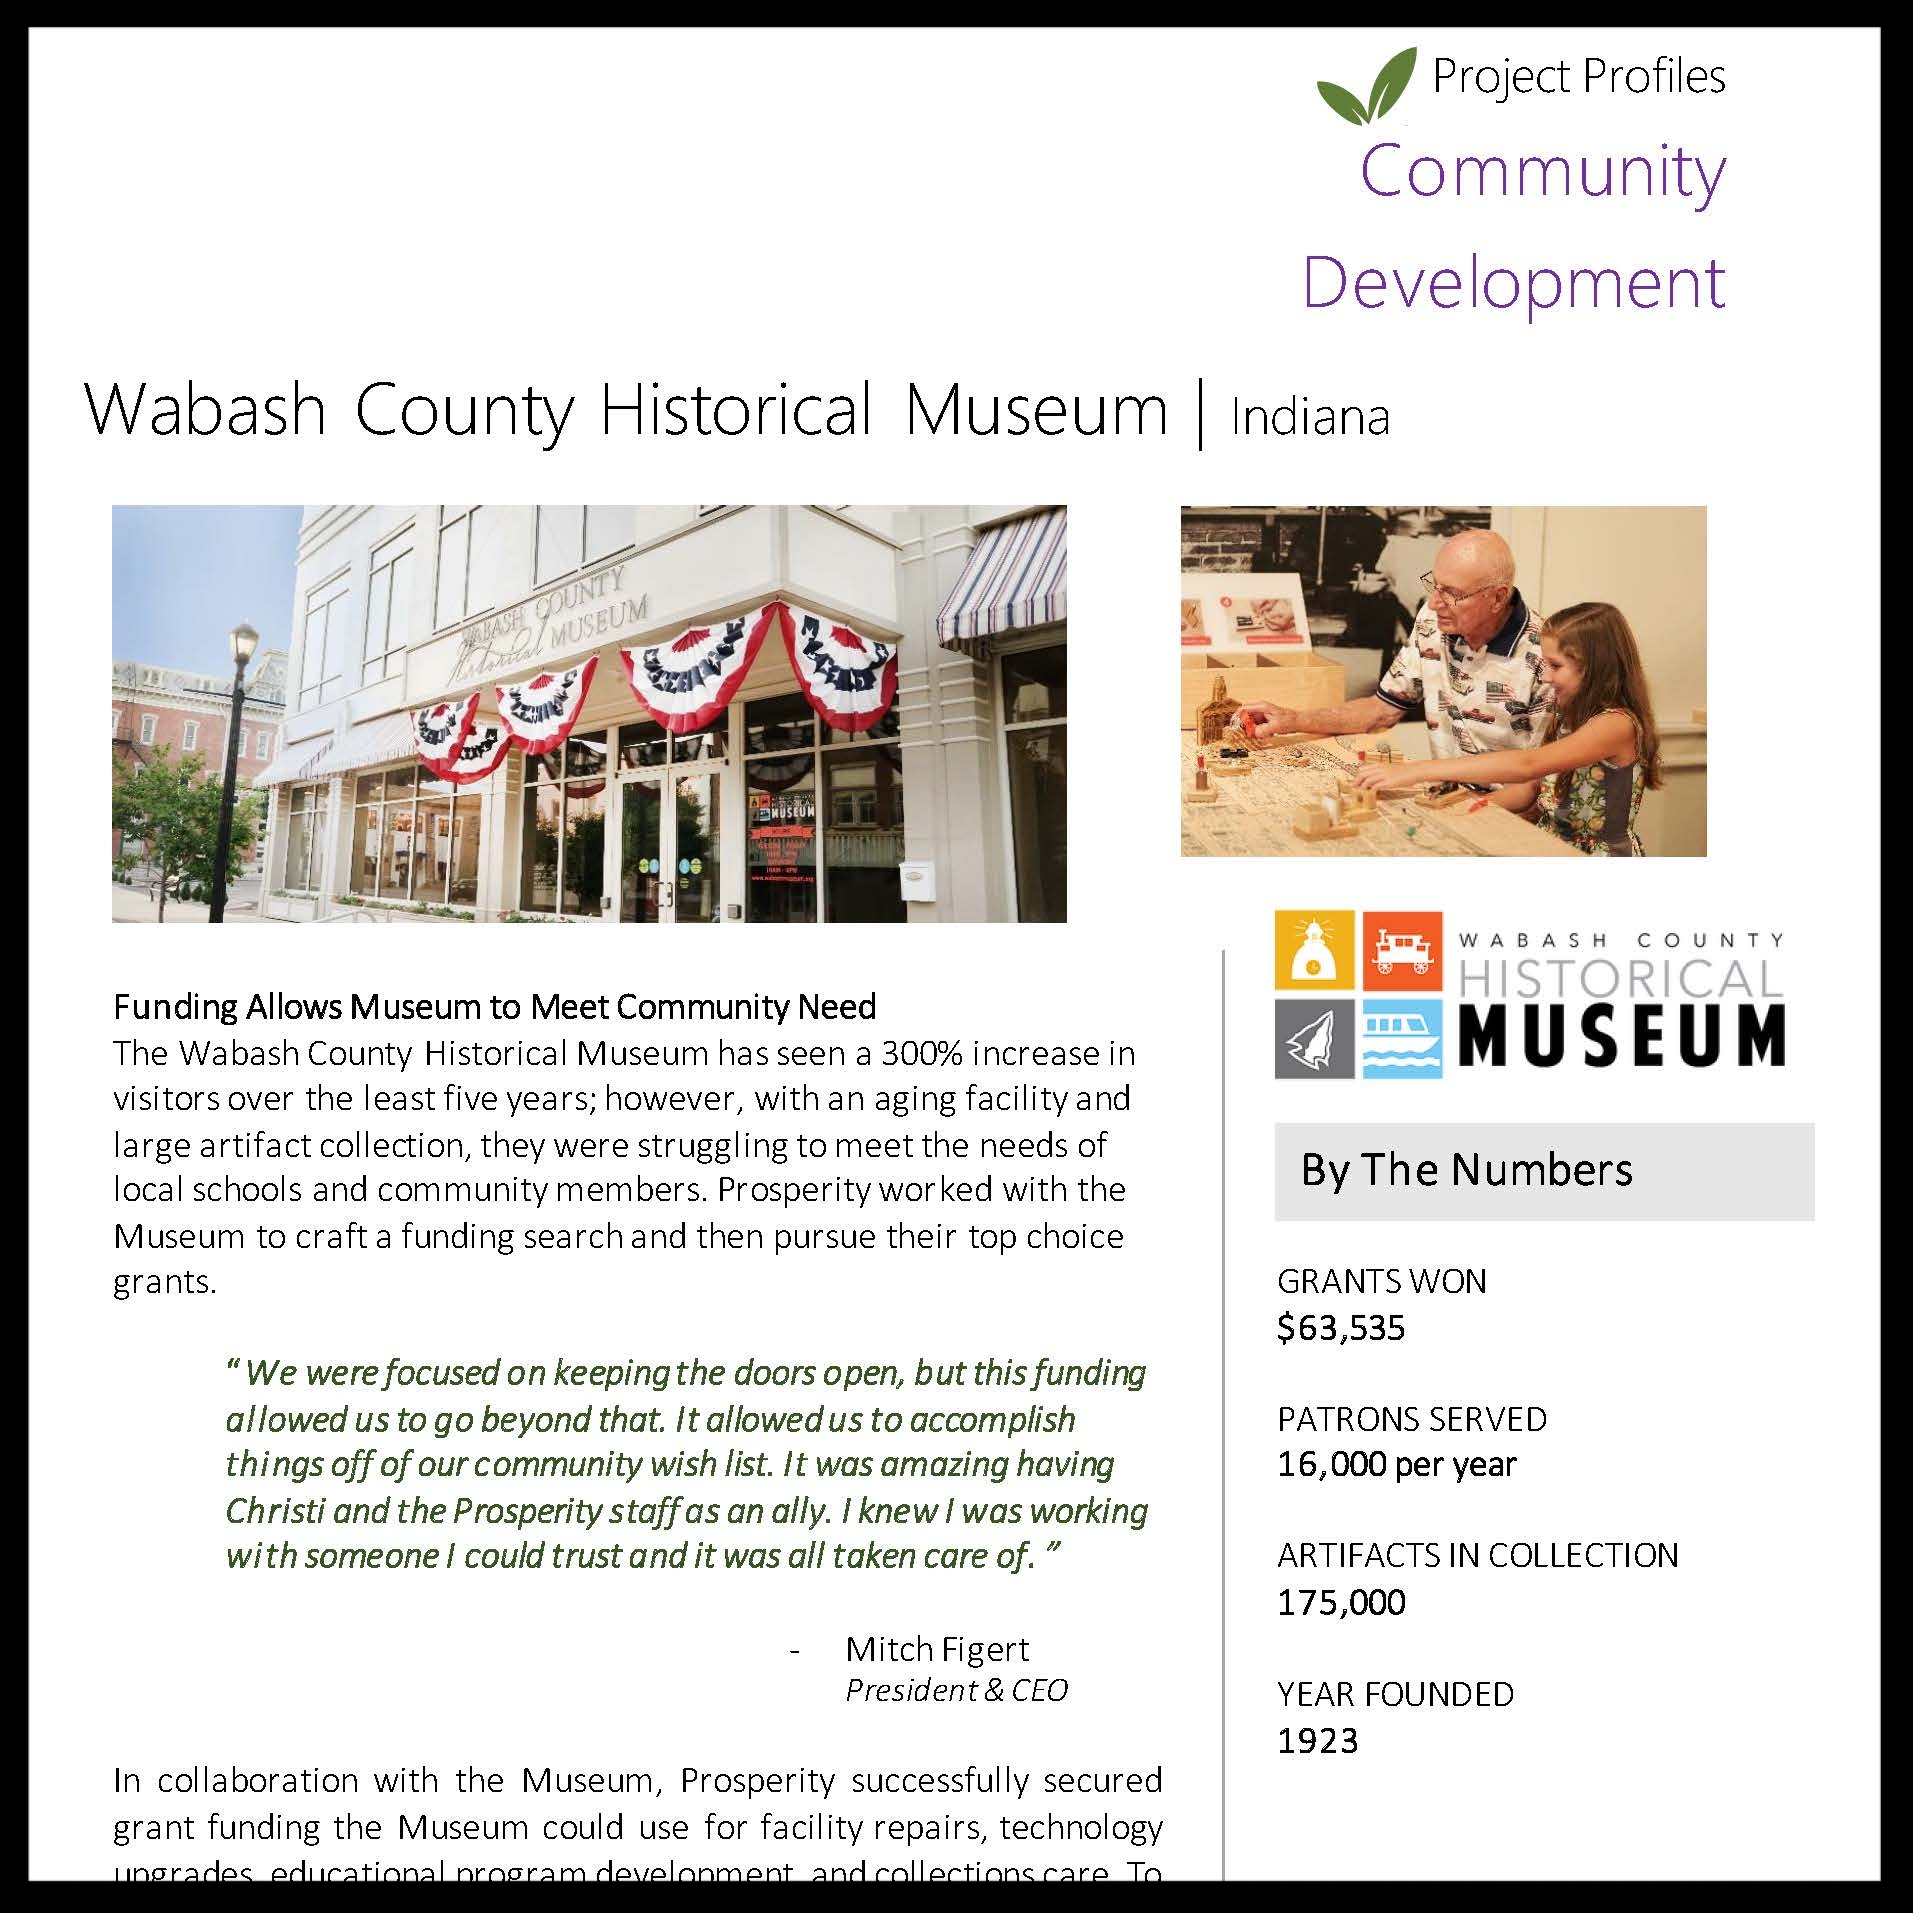 Wabash County Historical Museum